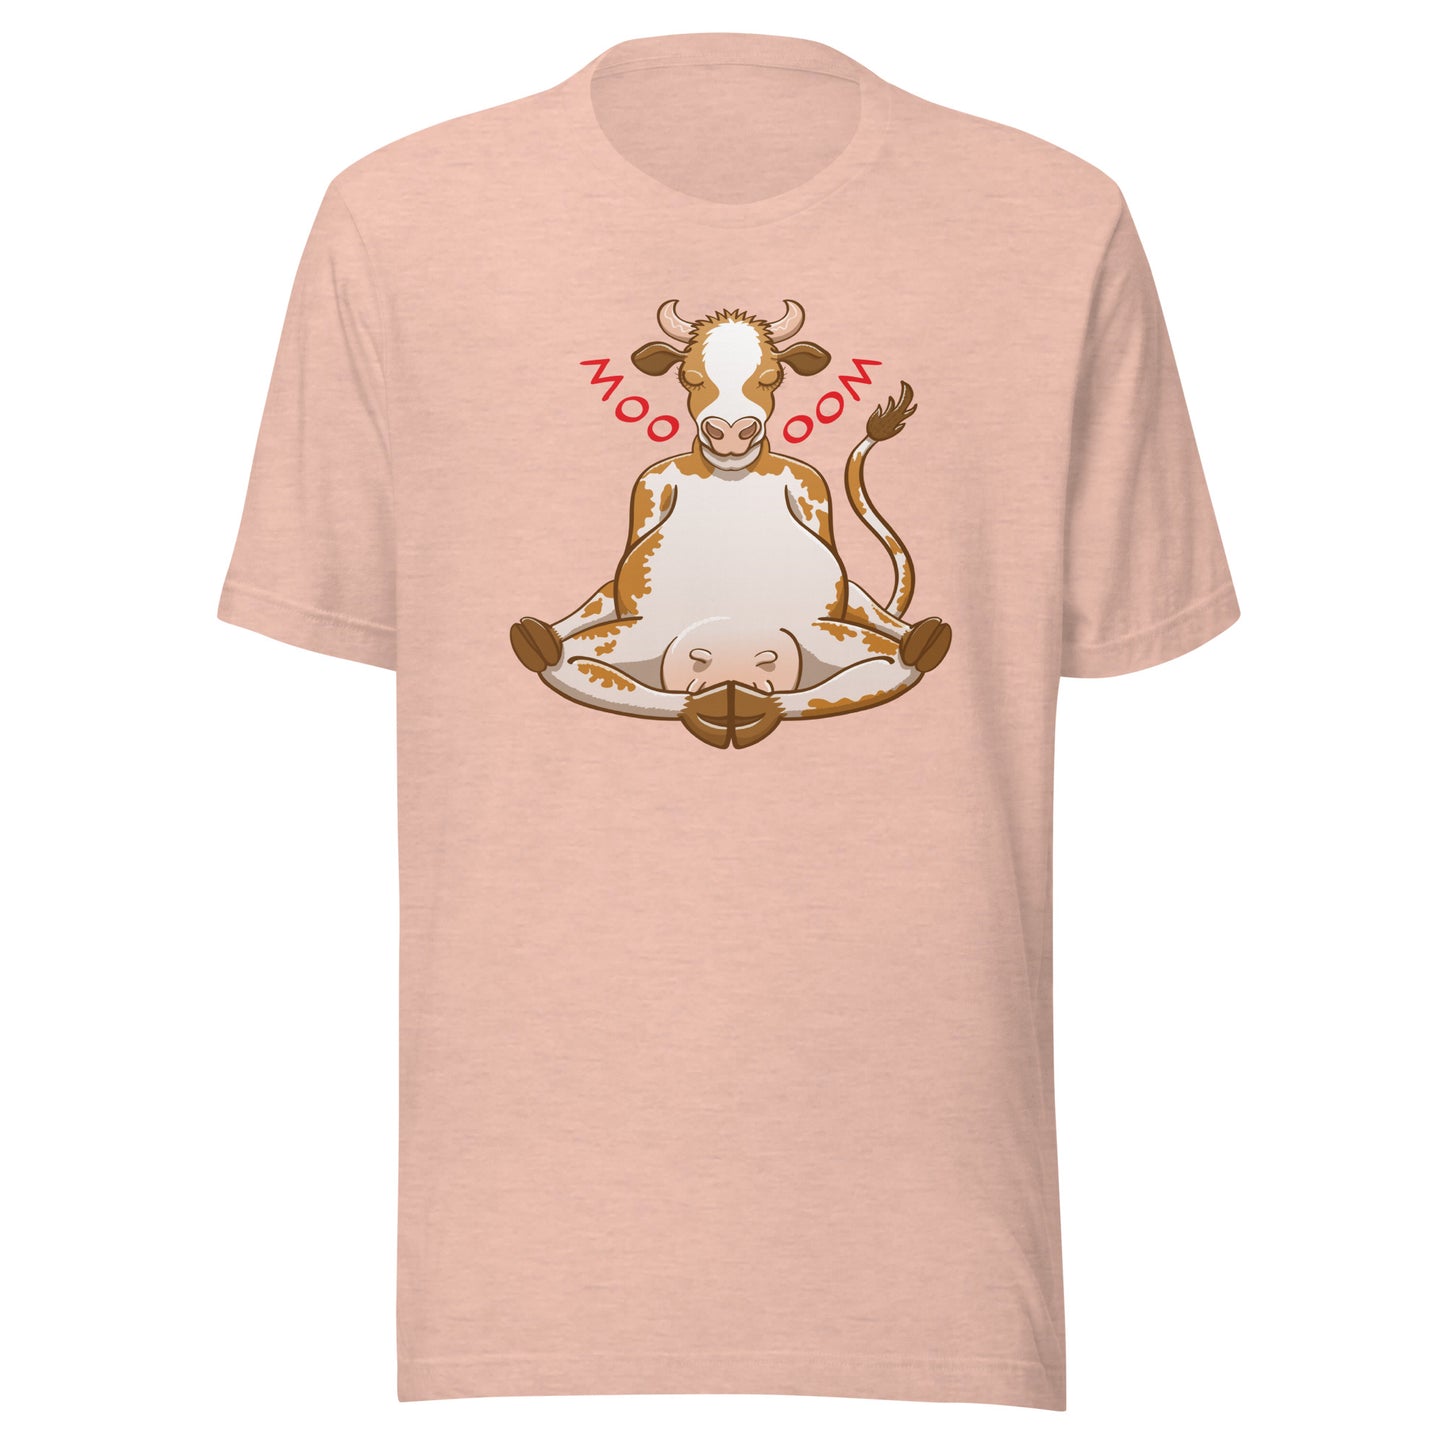 Time to meditate, follow this cow's amazing method Unisex t-shirt. Heather prism peach color. Front view